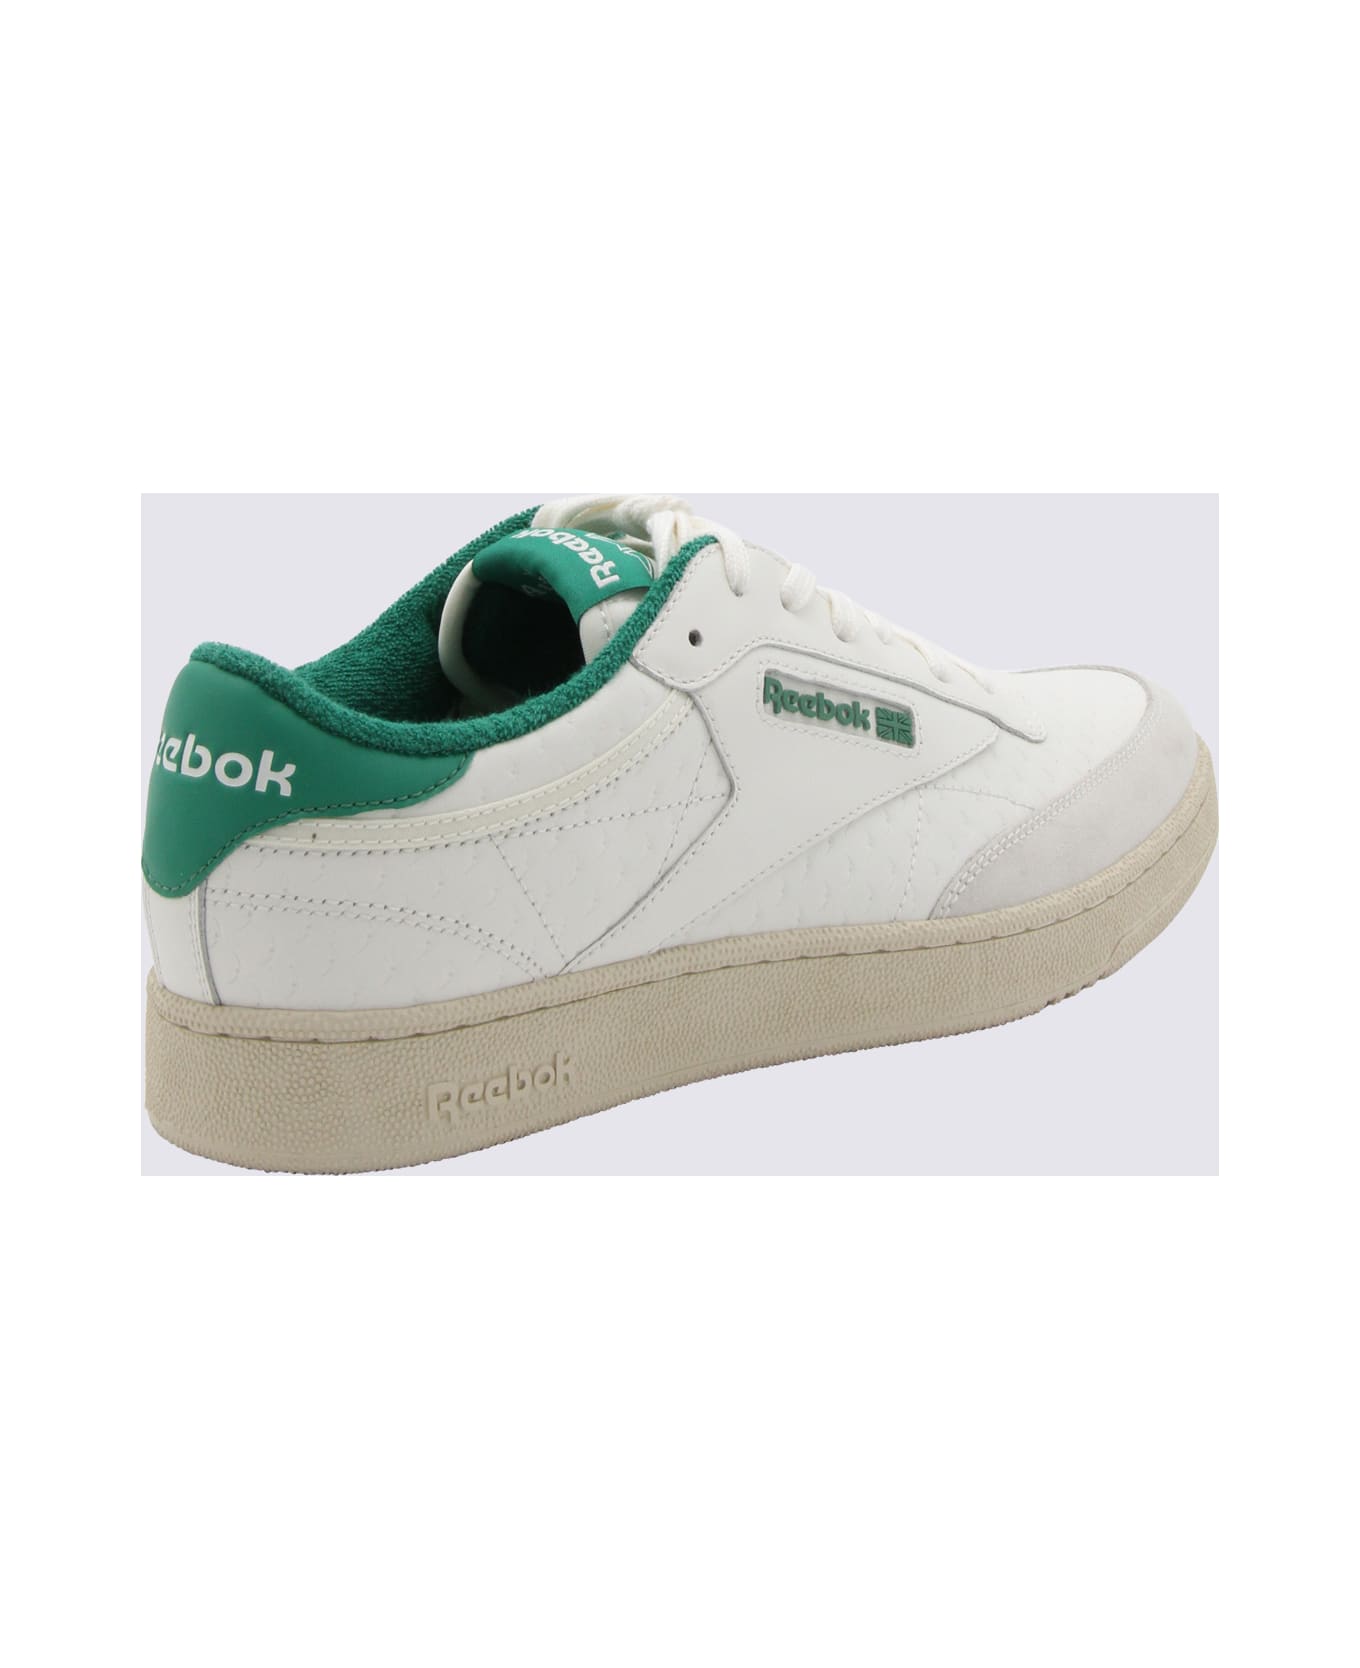 Reebok White And Green Leather Sneakers - White